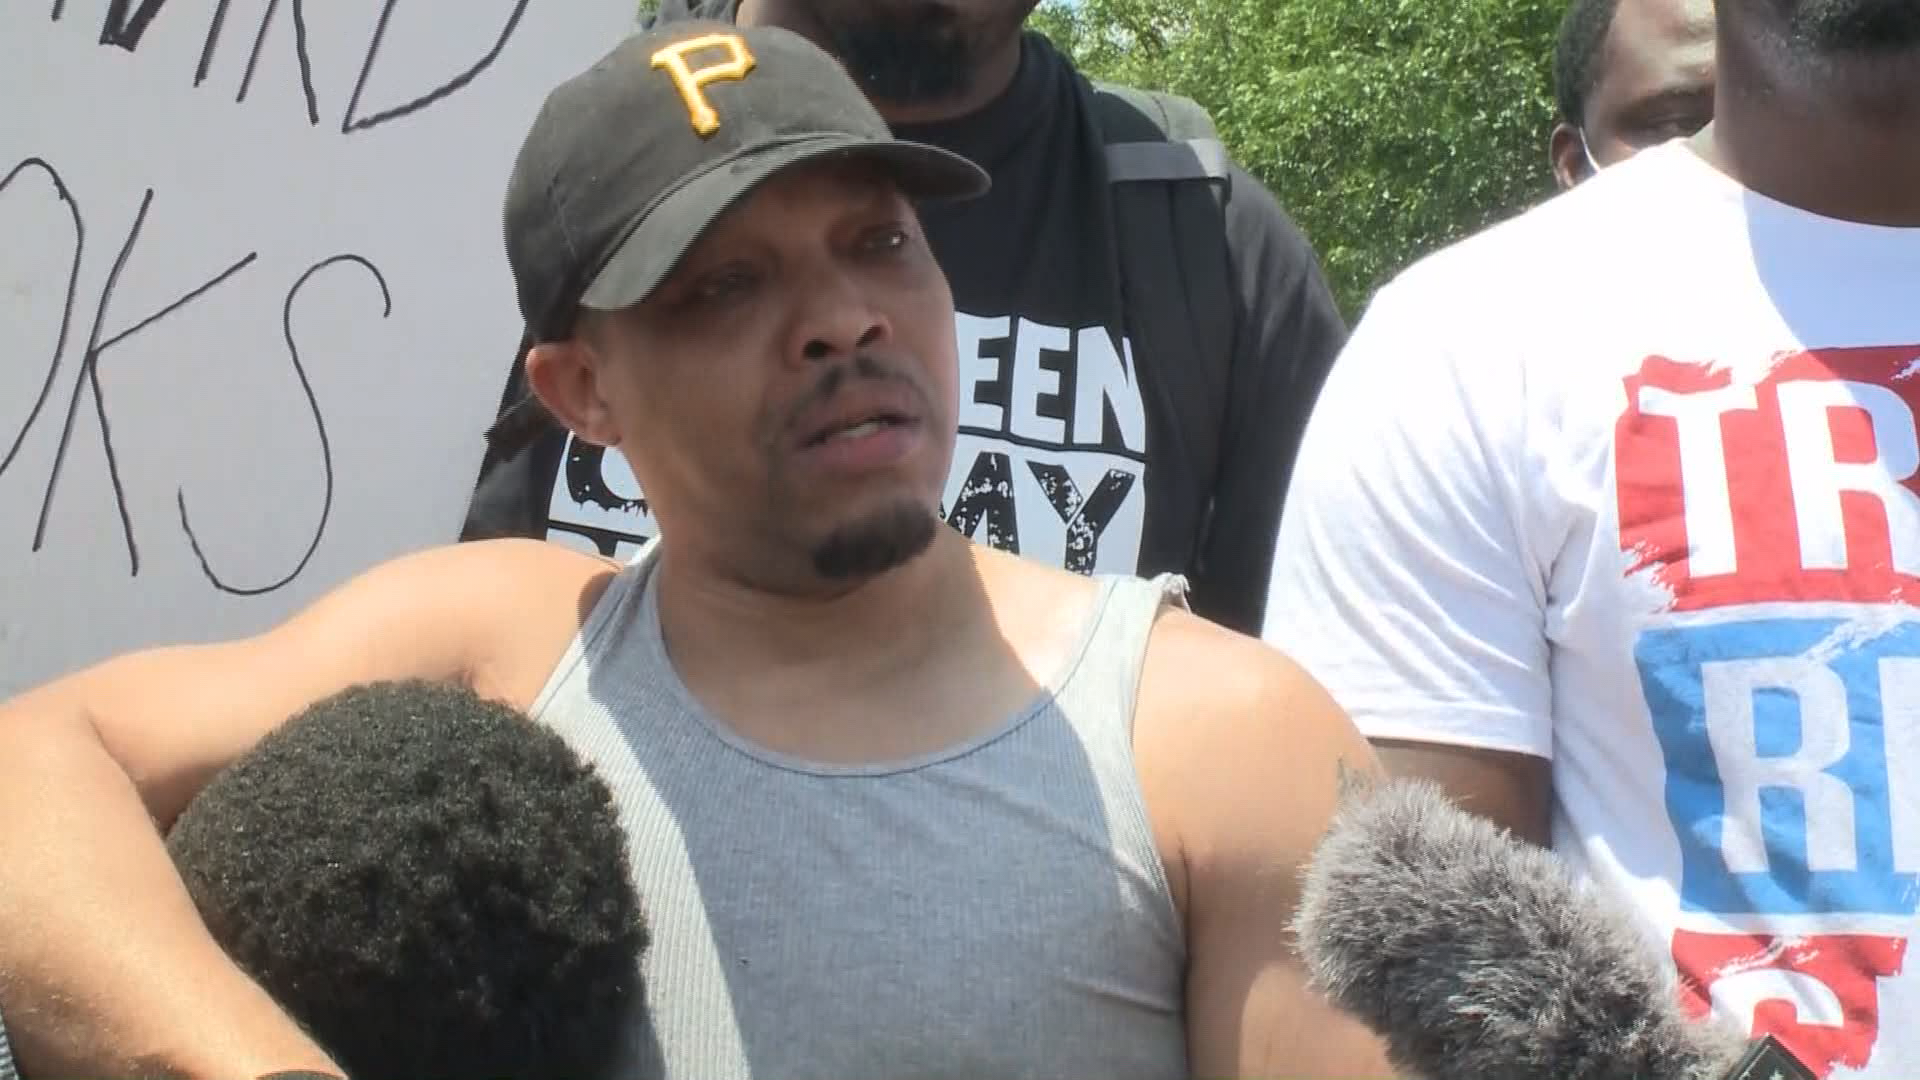 A cousin of Rayshard Brooks spoke Saturday about the Atlanta police shooting at a University Ave. Wendy's that took his cousin's life Friday night.